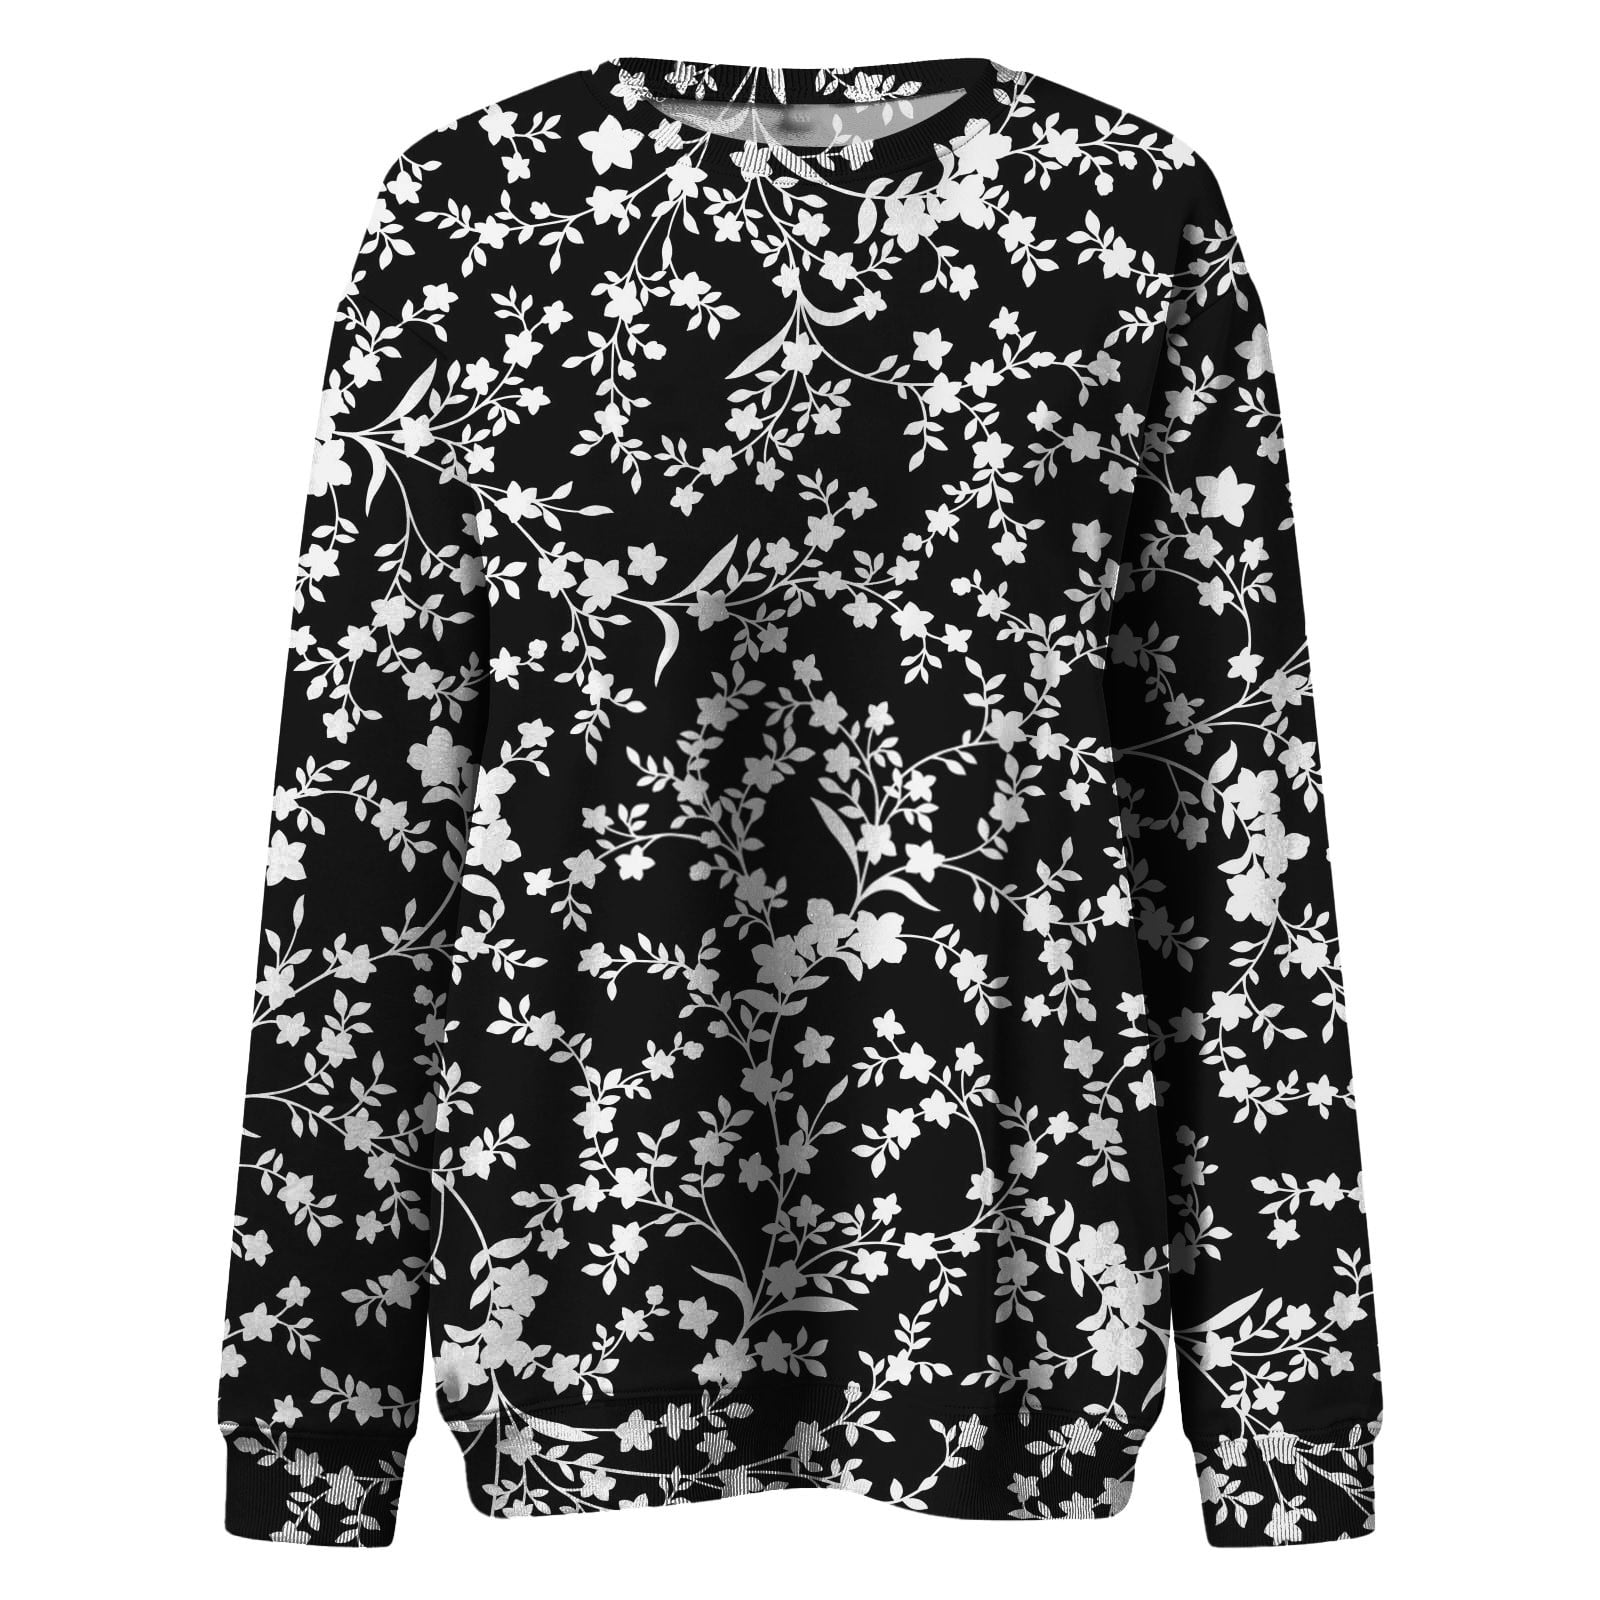 WPNMASNP Women Hoodies Y2k Hollow Out Fleece Sweatshirts Womens Casual Tops  Clearance,2 Dollar Items Only,Sale Clearance Items For Women,Bulk White  Tshirts, Today 2023,Buy Again Orders Placed By Me at  Women's Clothing